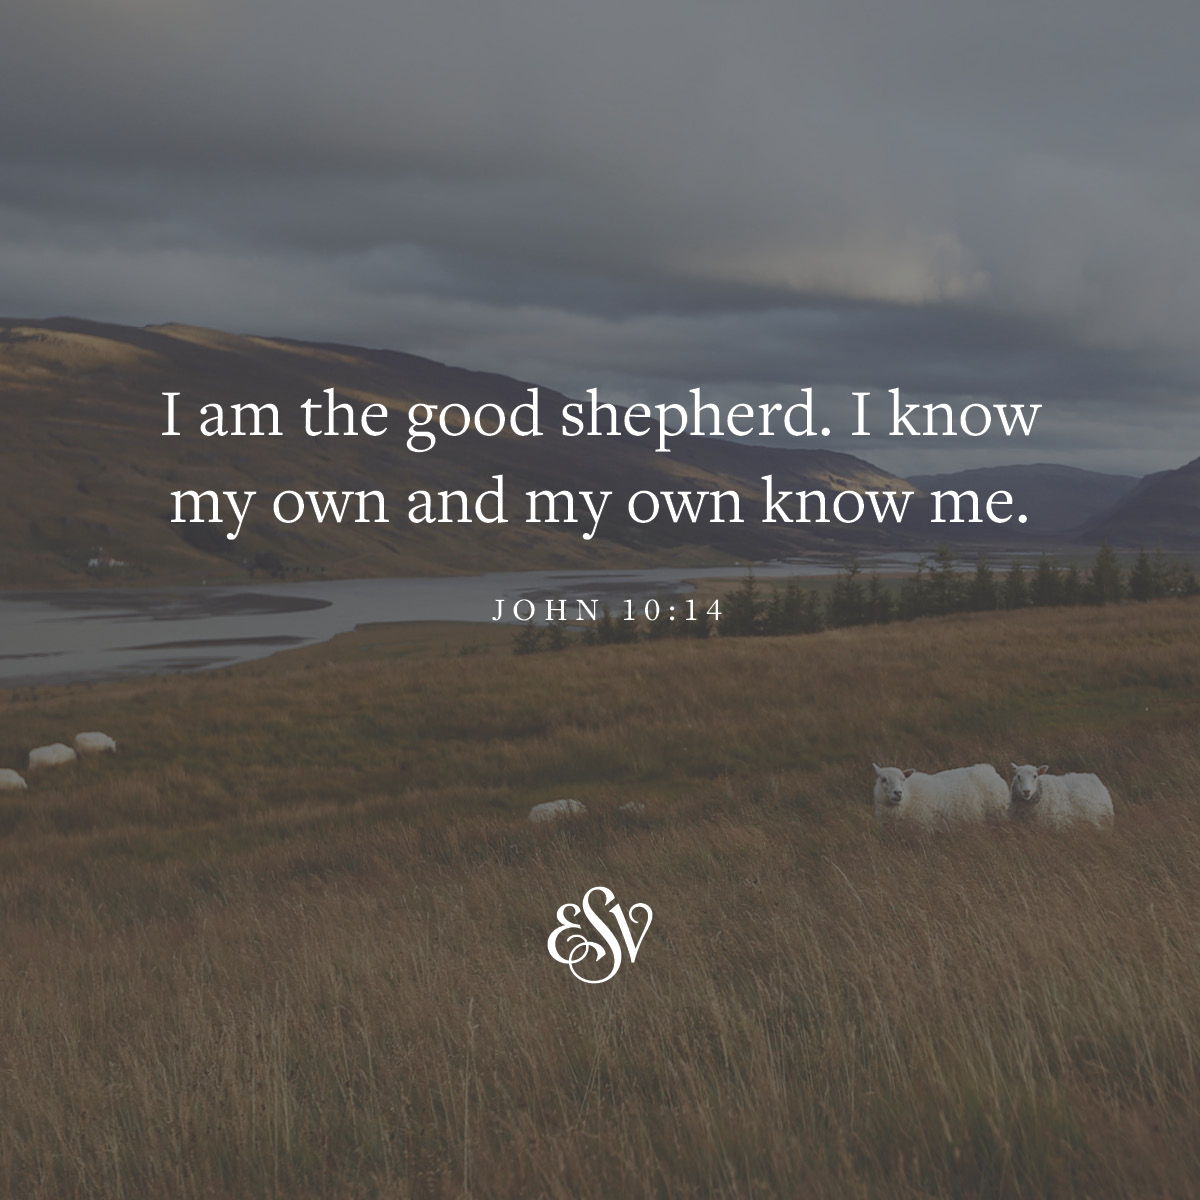 'I am the good shepherd. I know my own and my own know me. JOHN 10:14'